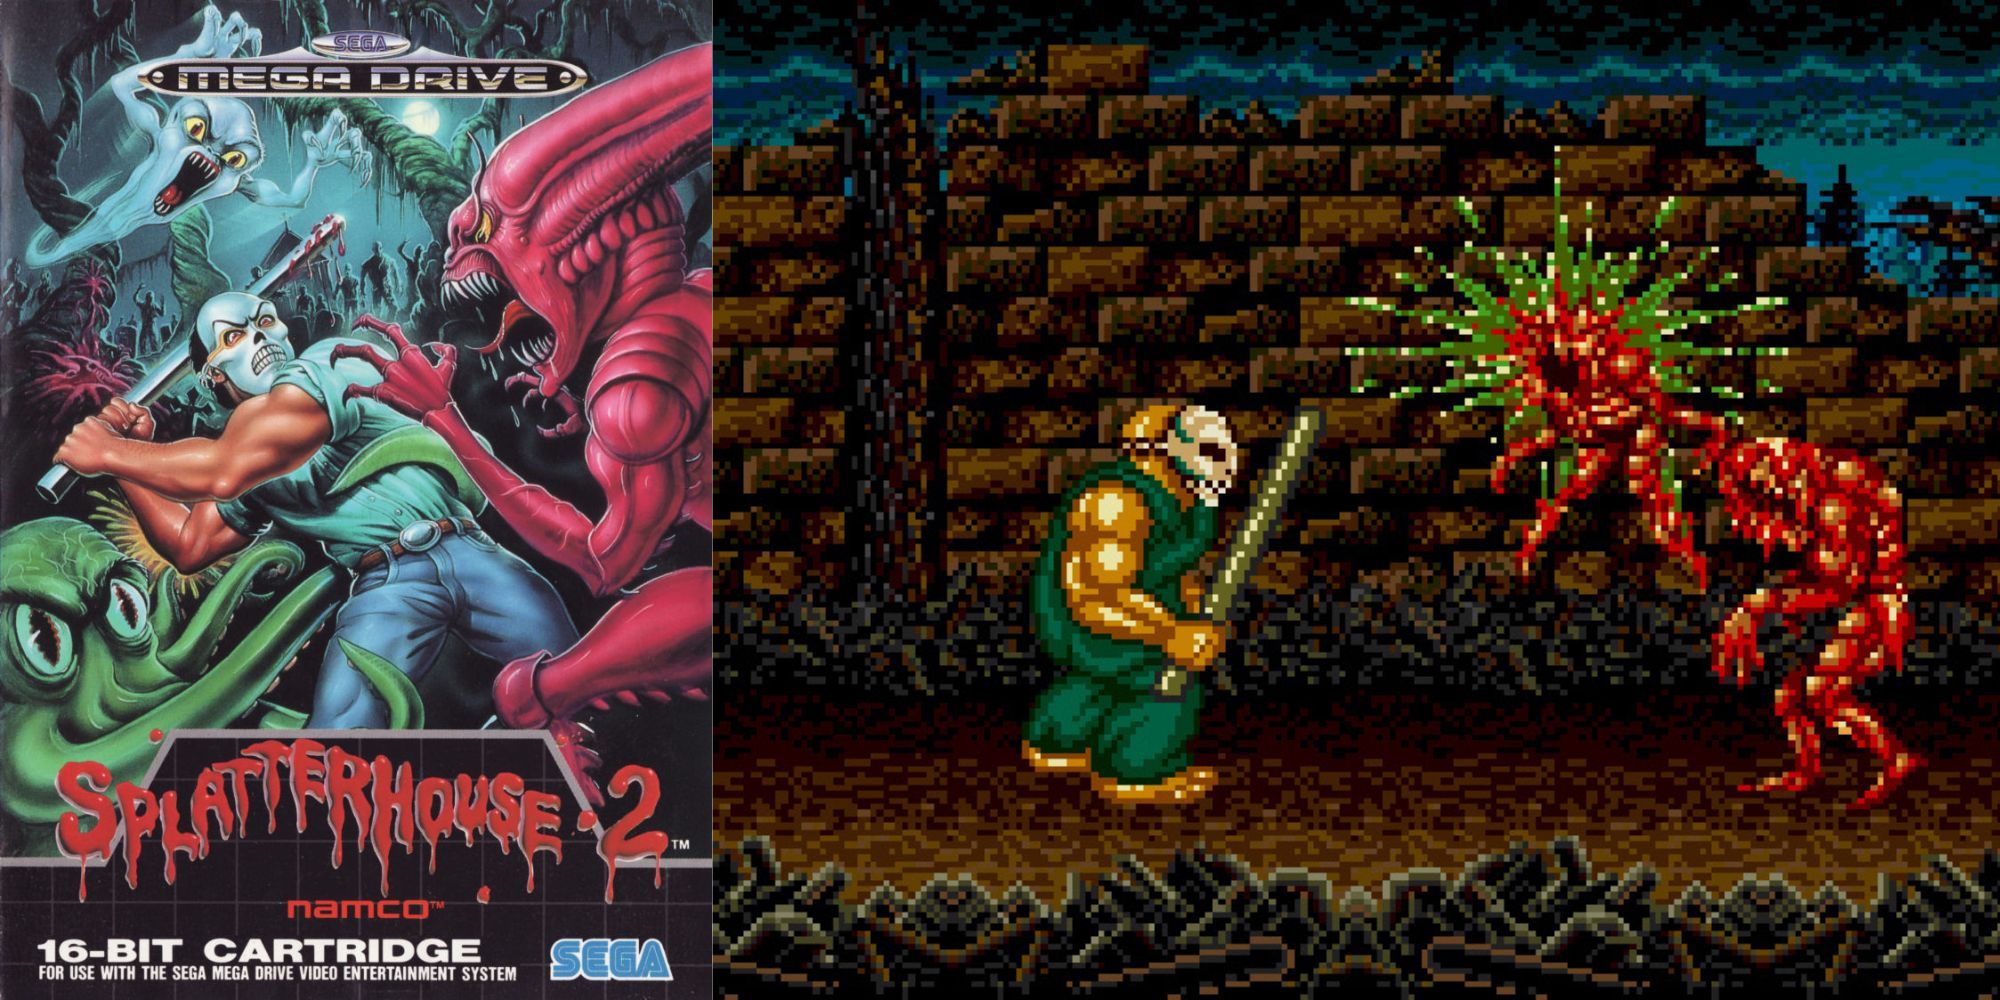 Splatterhouse 2 cover art with in-game image of hockeymasked character killing monsters.